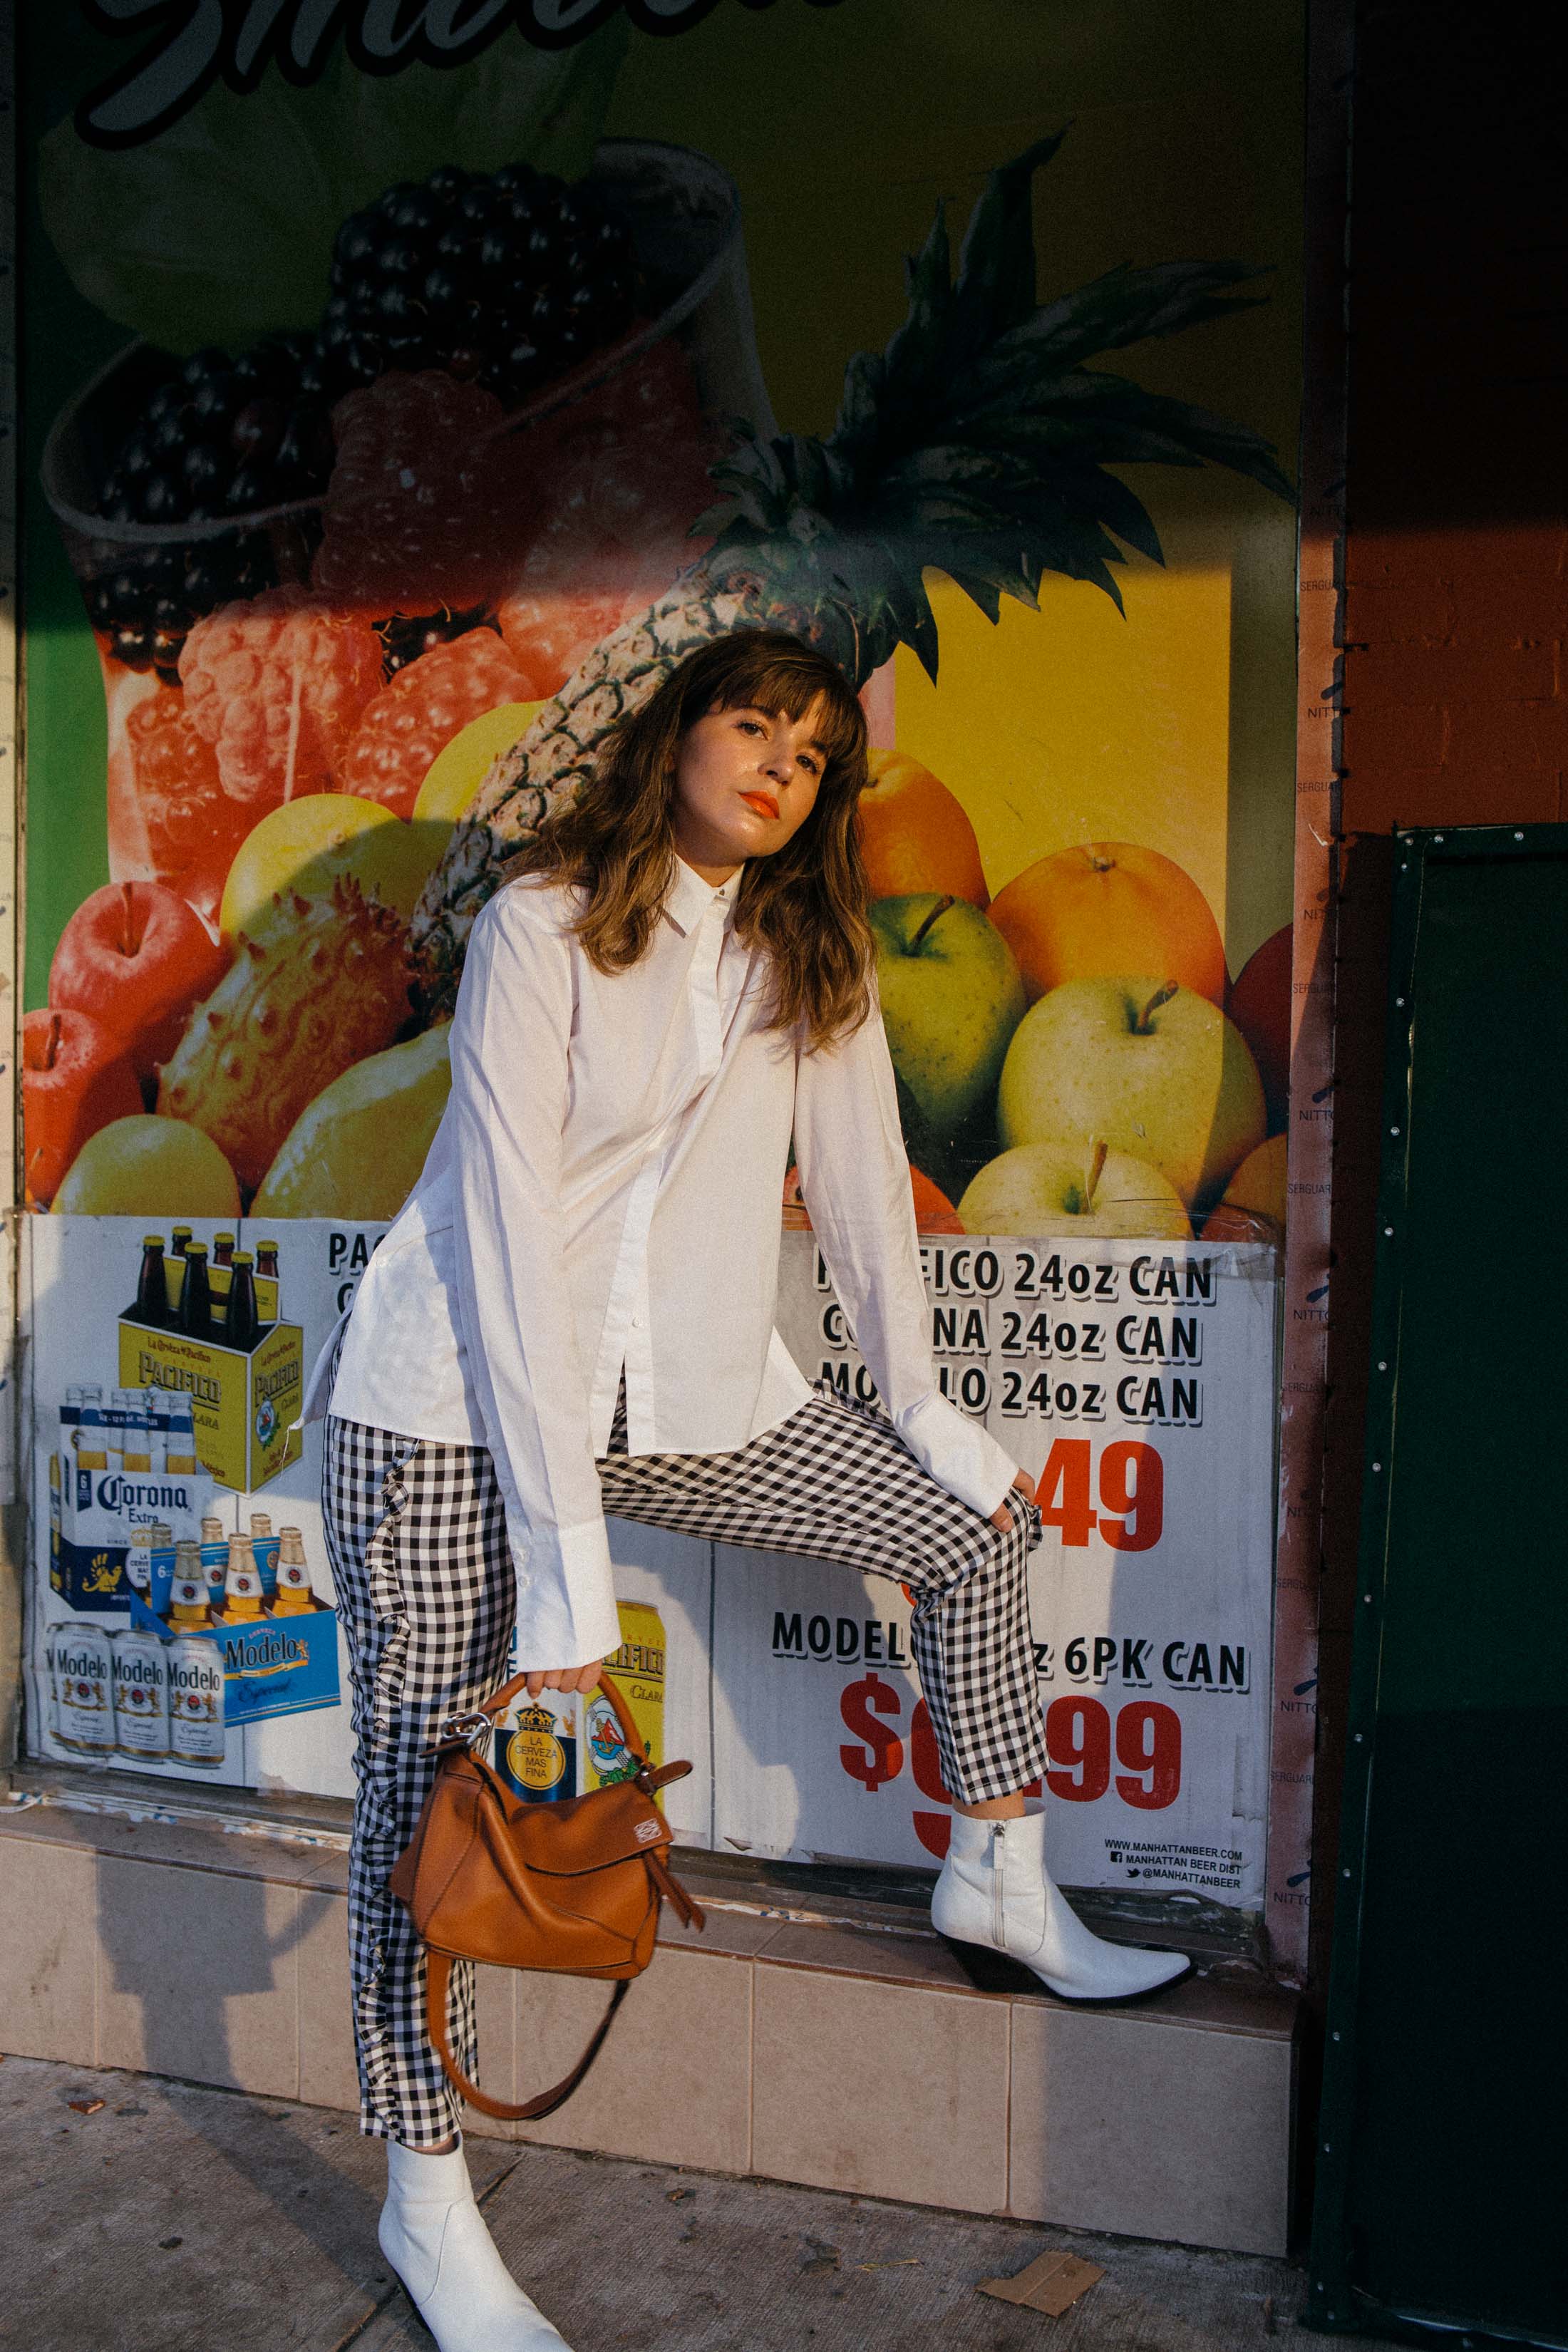 Maristella wears black and white gingham pants with white cowboy boots